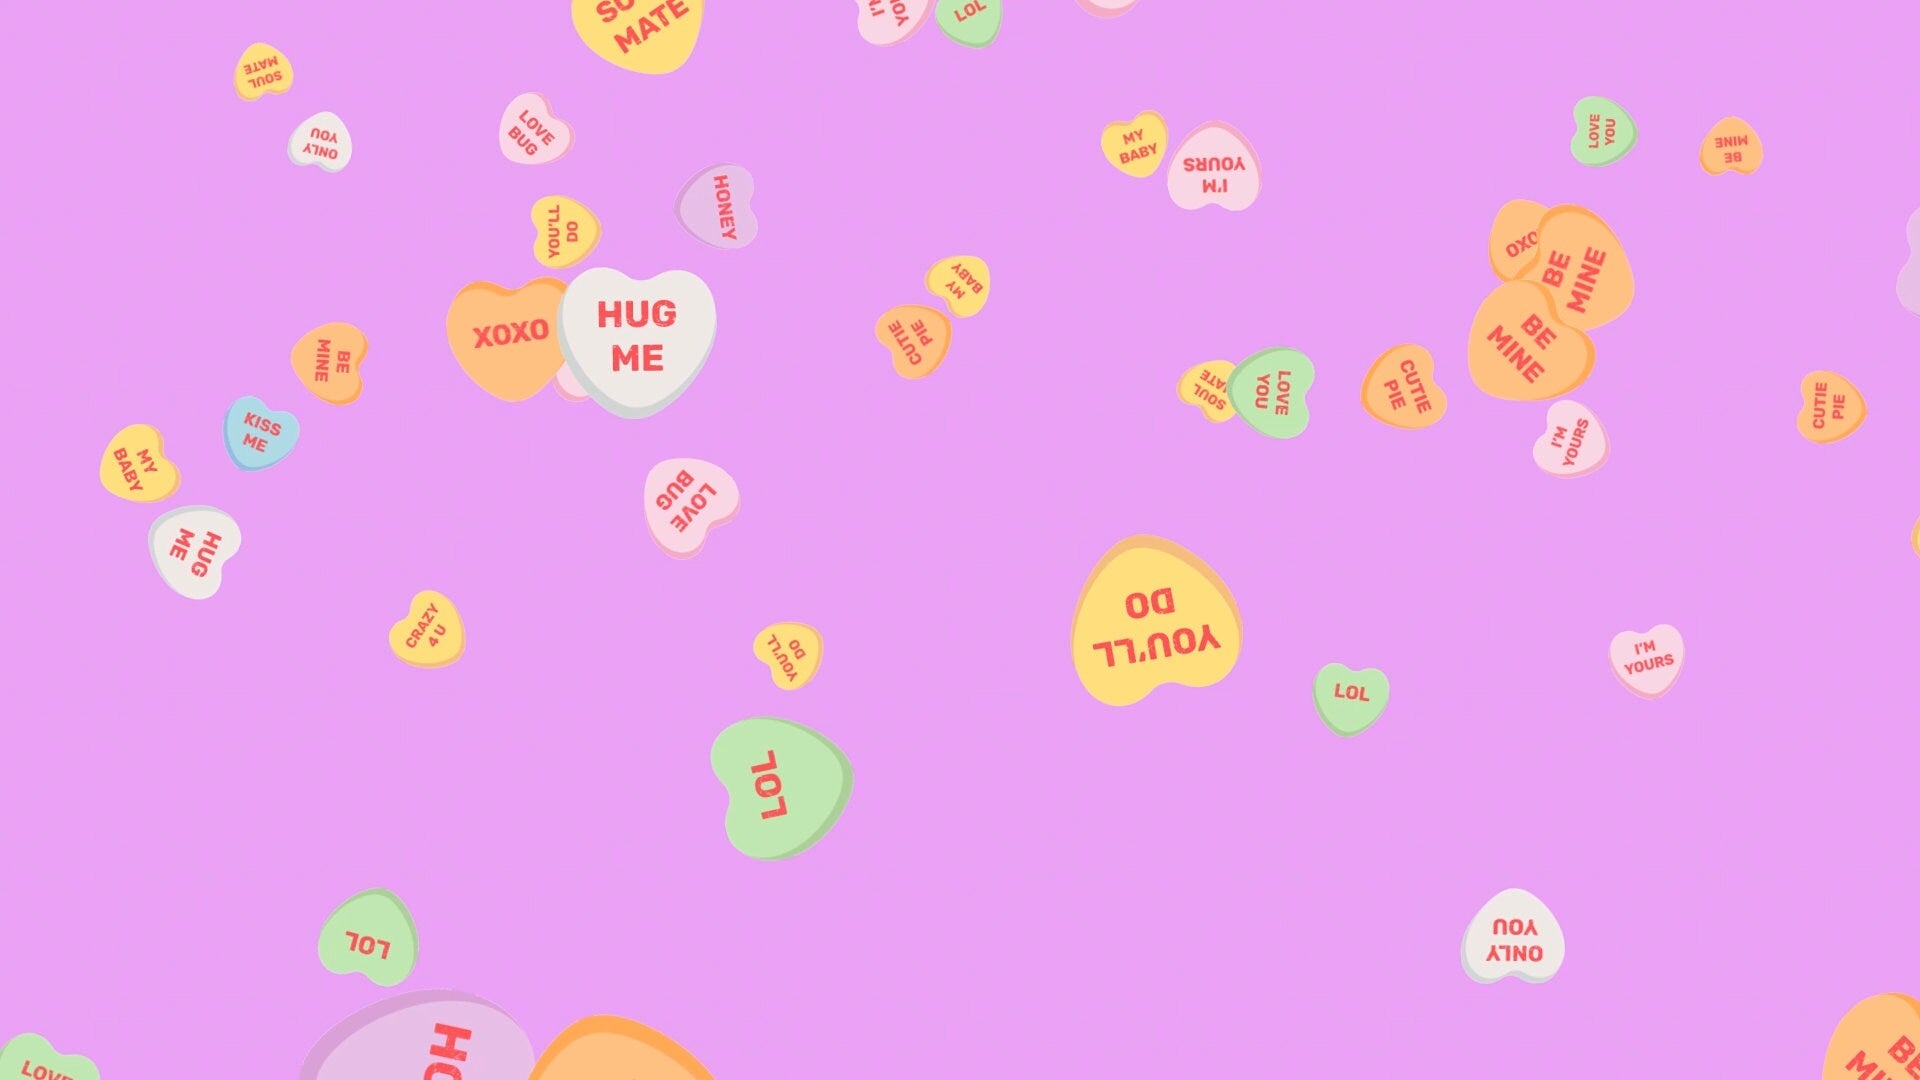 tumblr transparent candy hearts